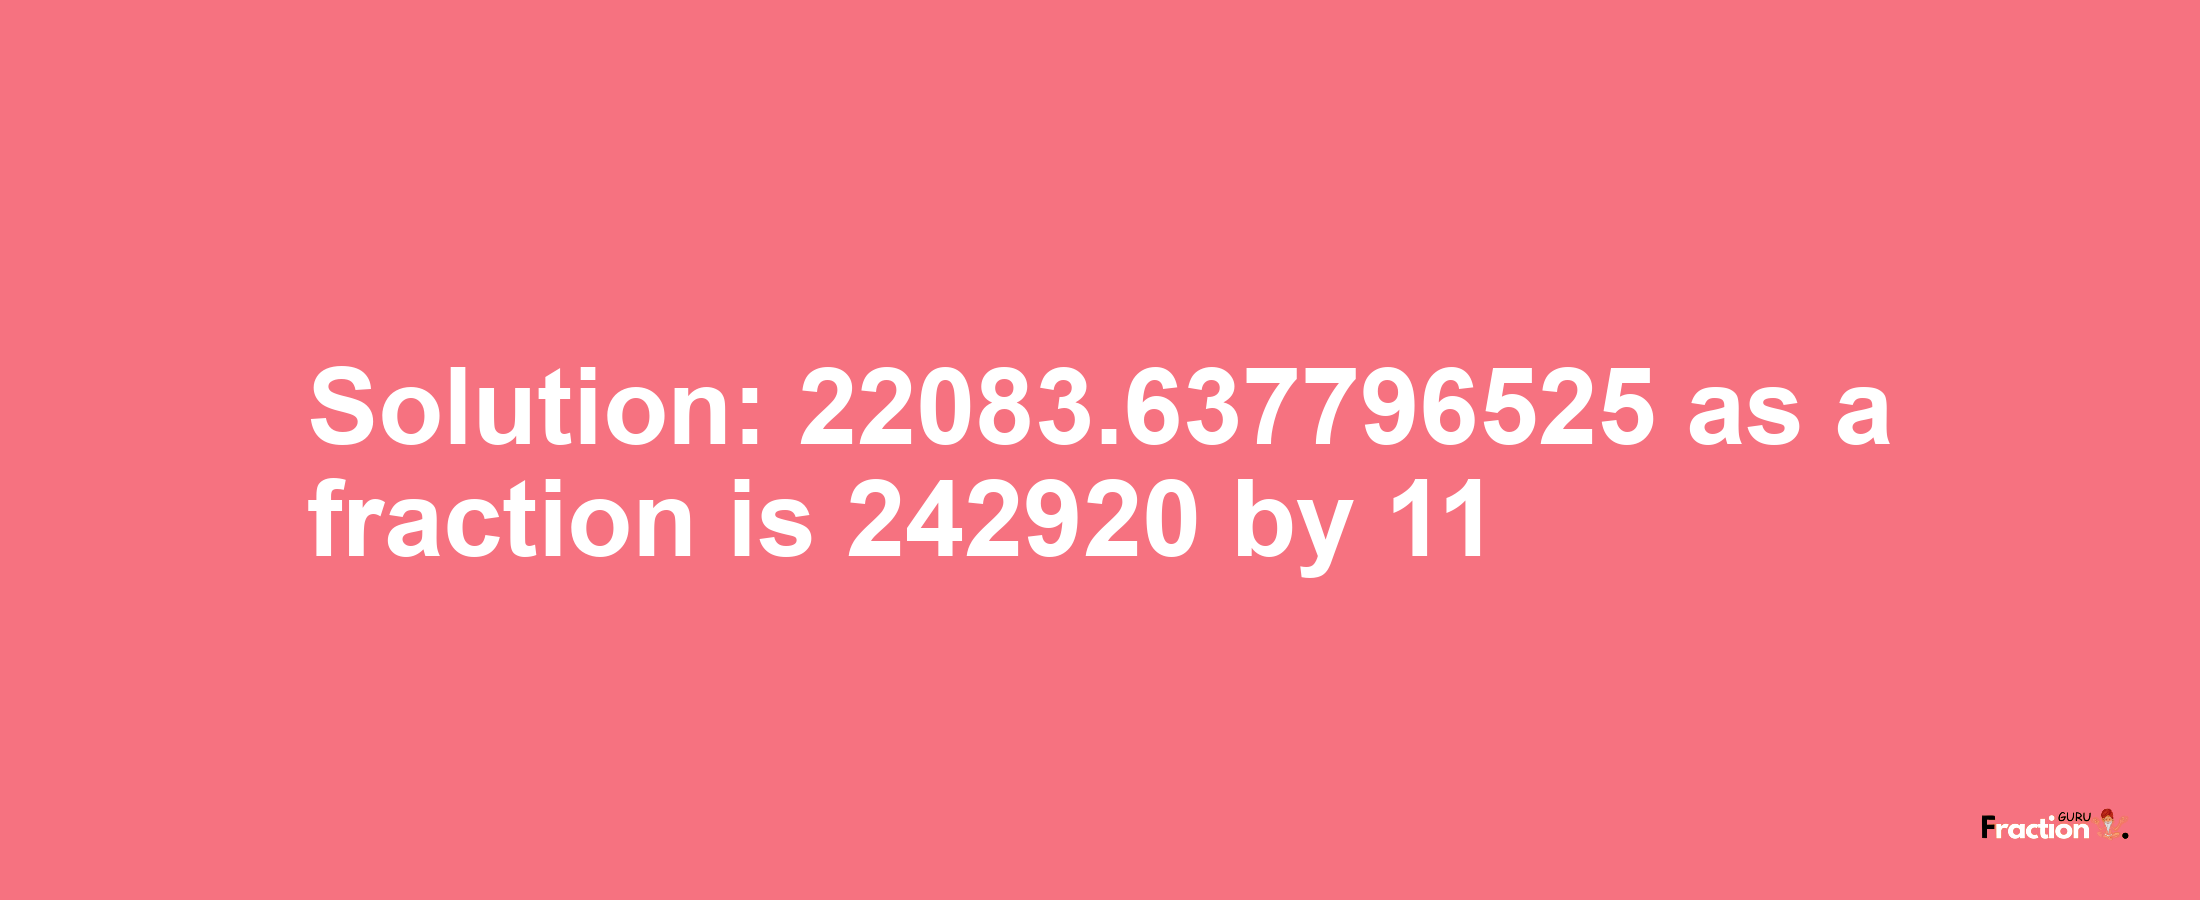 Solution:22083.637796525 as a fraction is 242920/11